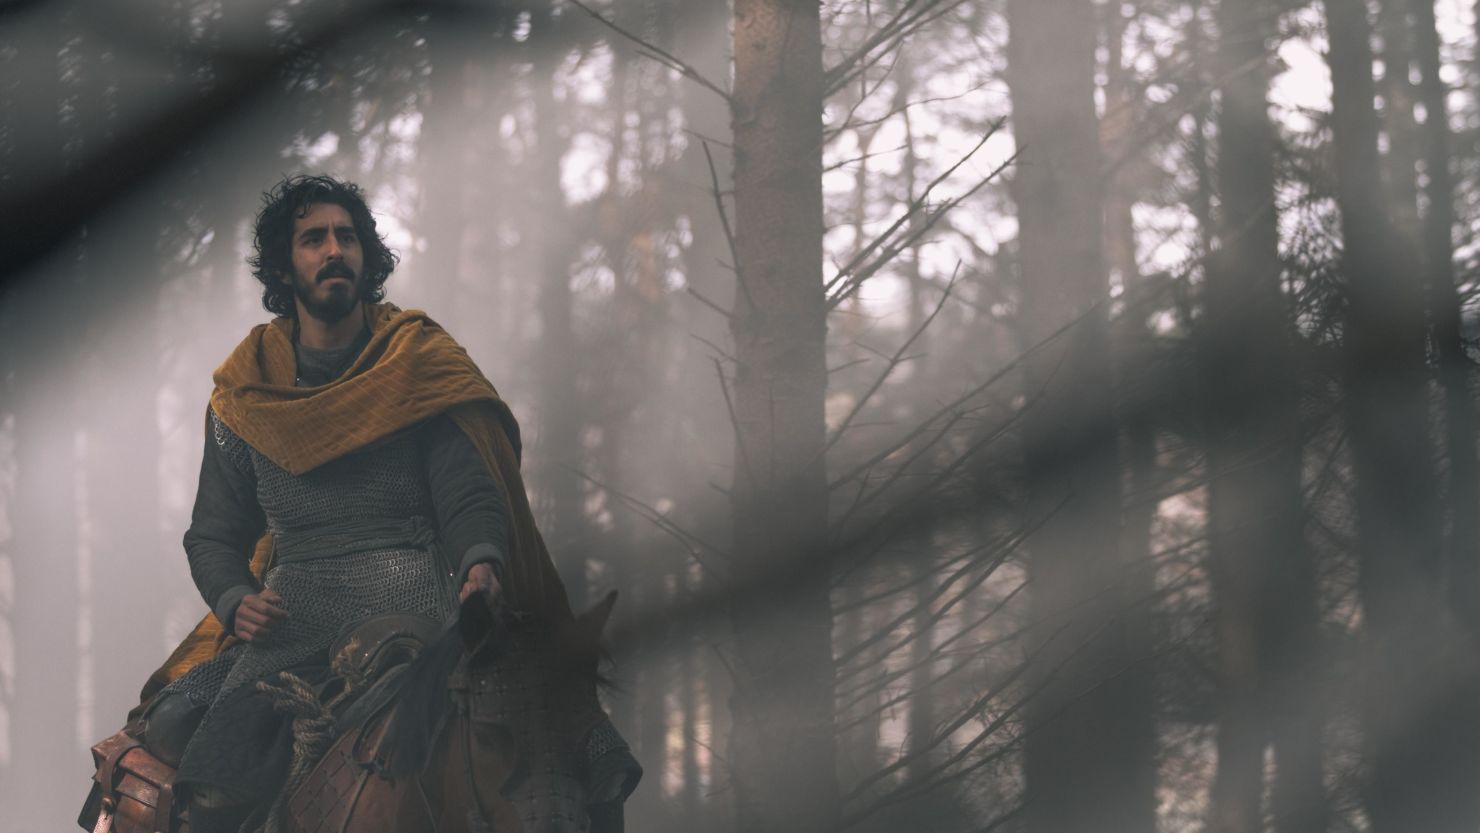 Dev Patel stars in "The Green Knight," putting a new spin on the Arthurian legend.